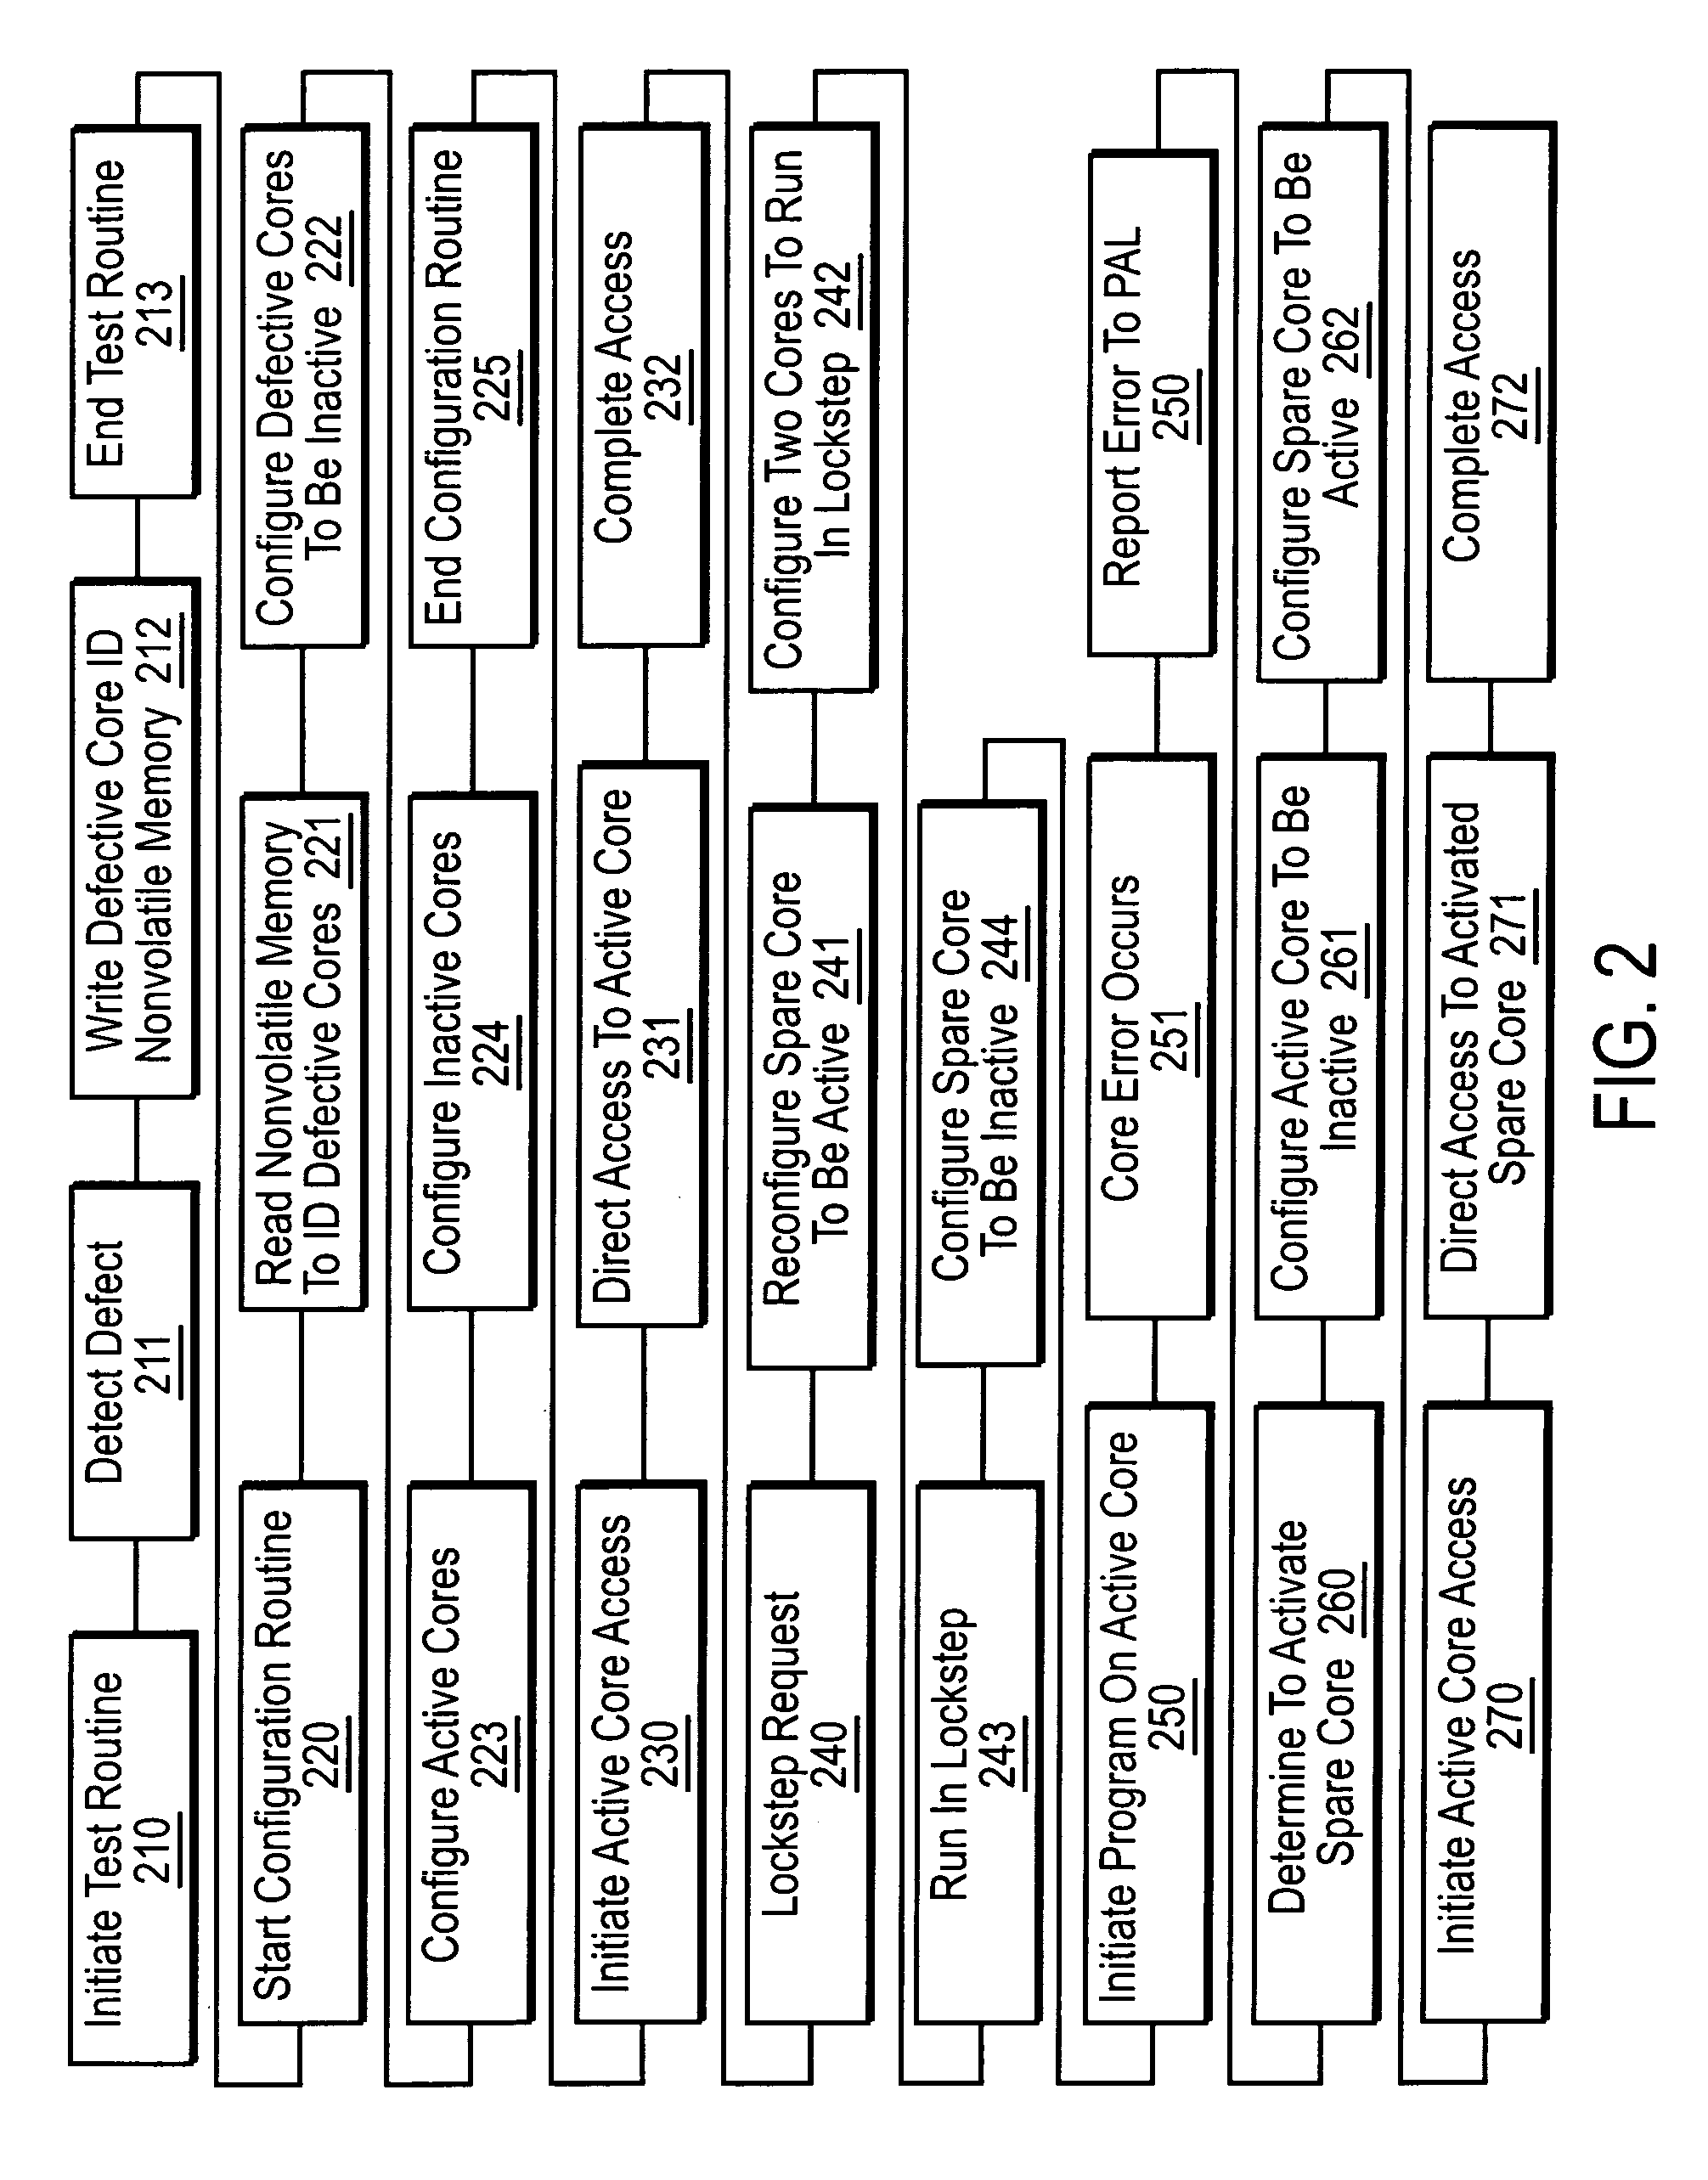 Multicore processor having active and inactive execution cores